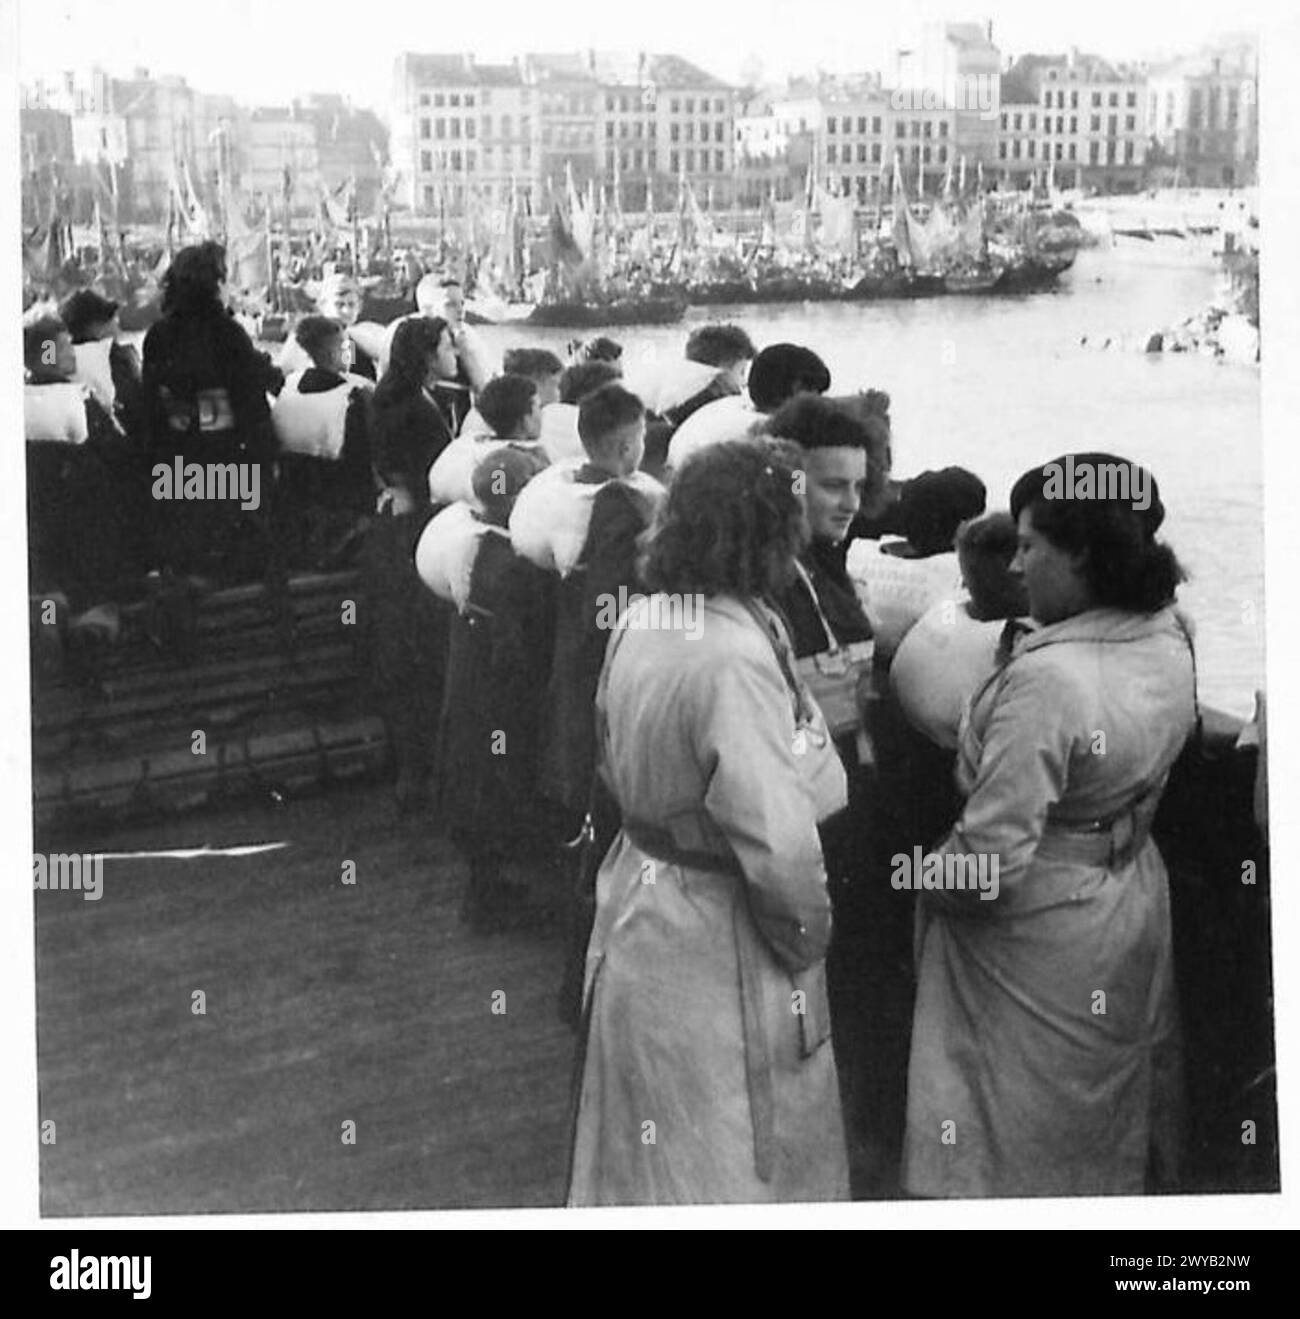 EVACUATION OF DUTCH CHILDREN TO ENGLAND - Original wartime caption: The children gaze with interest as the ship leaves the continental port. Photographic negative , British Army, 21st Army Group Stock Photo